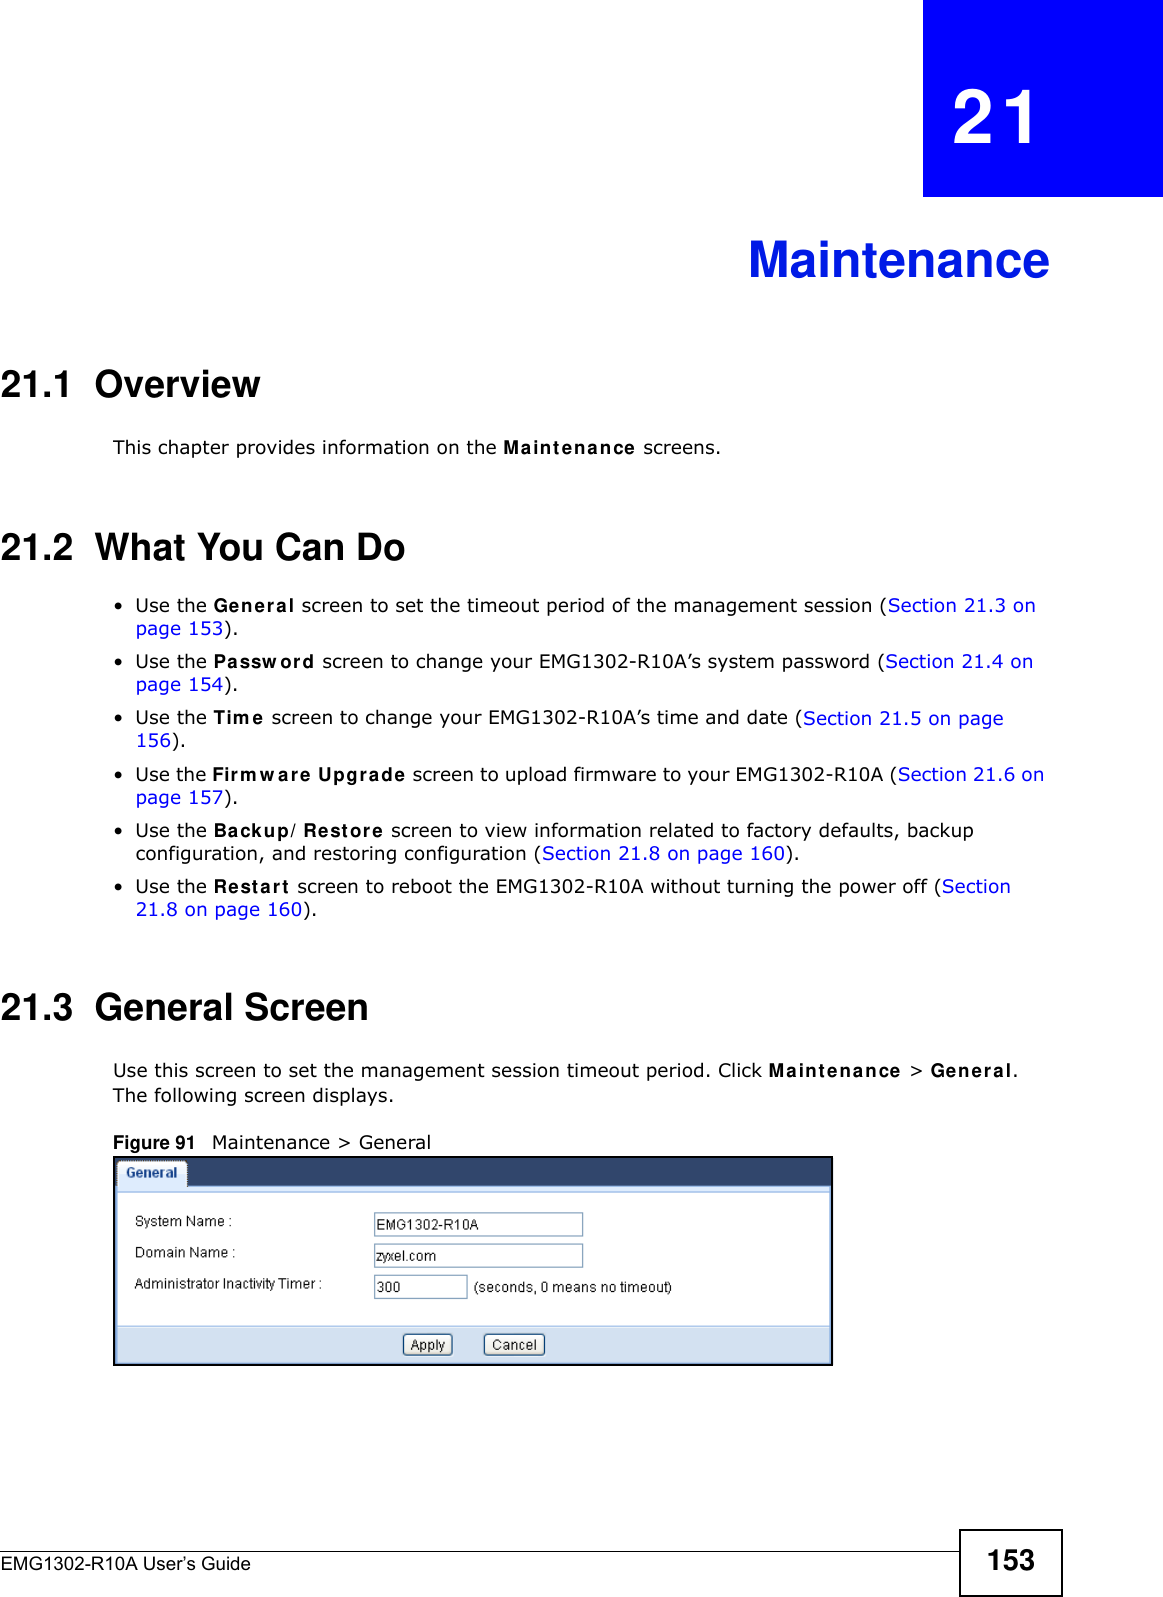 EMG1302-R10A User’s Guide 153CHAPTER   21Maintenance21.1  OverviewThis chapter provides information on the Main t e n a nce screens.21.2  What You Can Do•Use the Ge n e r a l screen to set the timeout period of the management session (Section 21.3 on page 153). •Use the Passw ord screen to change your EMG1302-R10A’s system password (Section 21.4 on page 154).•Use the Tim e  screen to change your EMG1302-R10A’s time and date (Section 21.5 on page 156).•Use the Firm w are Upgr a de screen to upload firmware to your EMG1302-R10A (Section 21.6 on page 157).•Use the Backup/ Restore screen to view information related to factory defaults, backup configuration, and restoring configuration (Section 21.8 on page 160).•Use the Restart  screen to reboot the EMG1302-R10A without turning the power off (Section 21.8 on page 160).21.3  General Screen Use this screen to set the management session timeout period. Click M a int e na n ce  &gt; General. The following screen displays.Figure 91   Maintenance &gt; General 